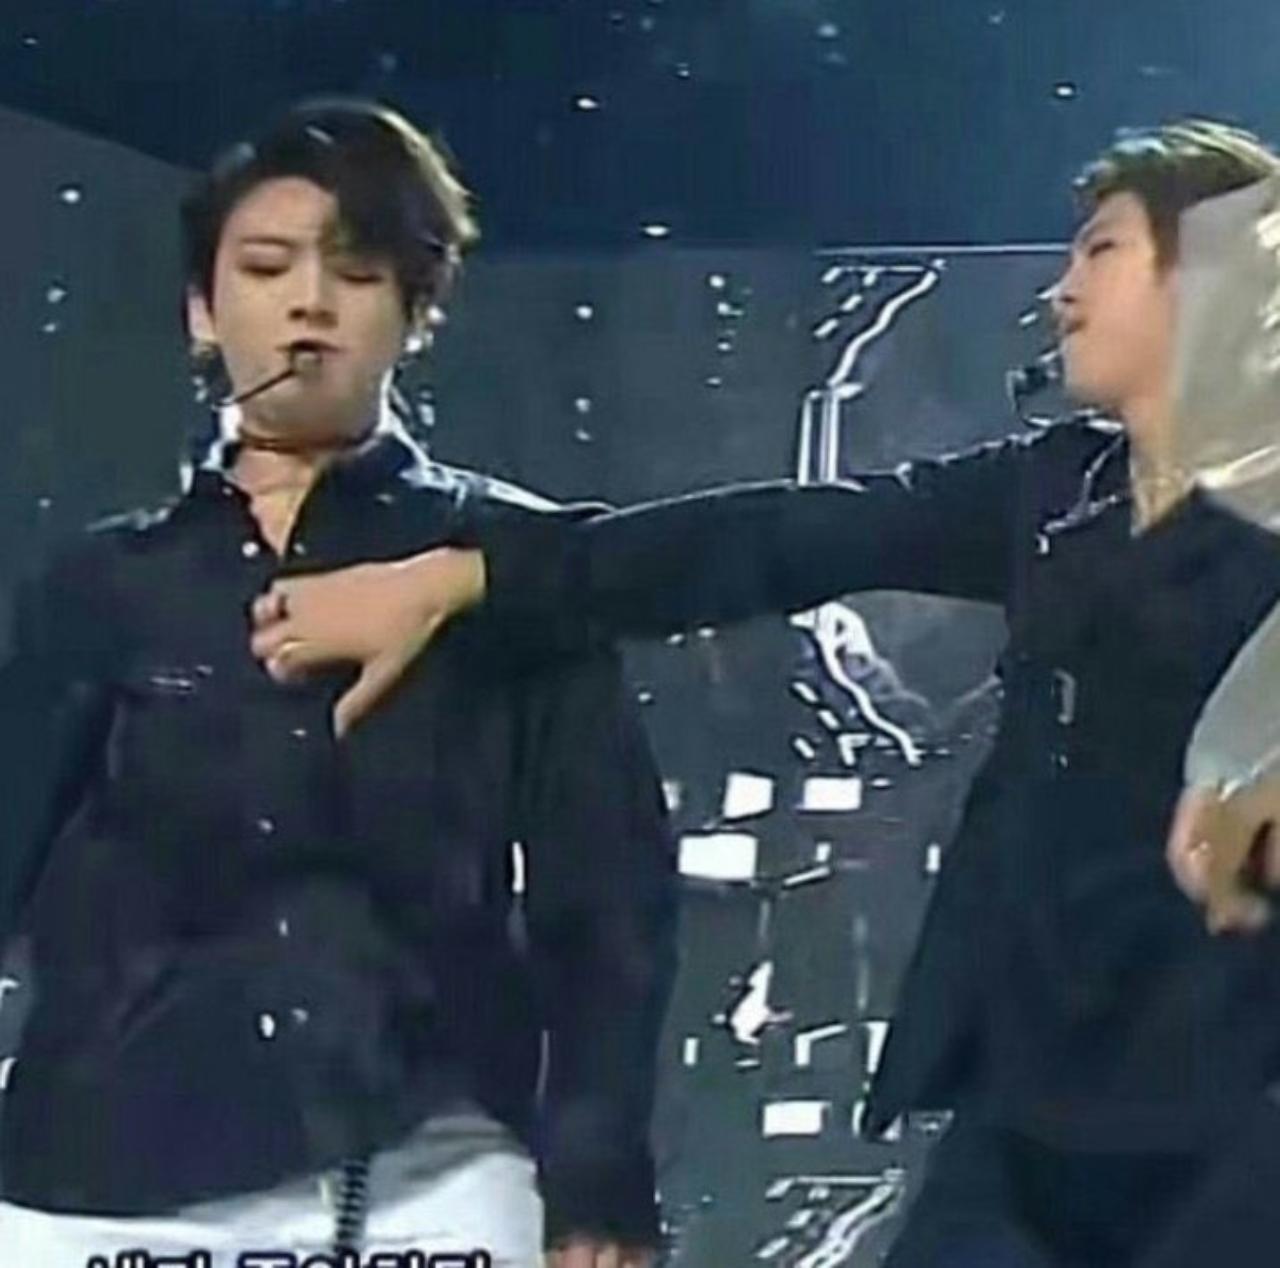 Here is one we aren't complaining about! Namjoon accidentally ripped off Jungkook's shirt during a 'Fake Love' performance exposing the maknae's sculpted body.